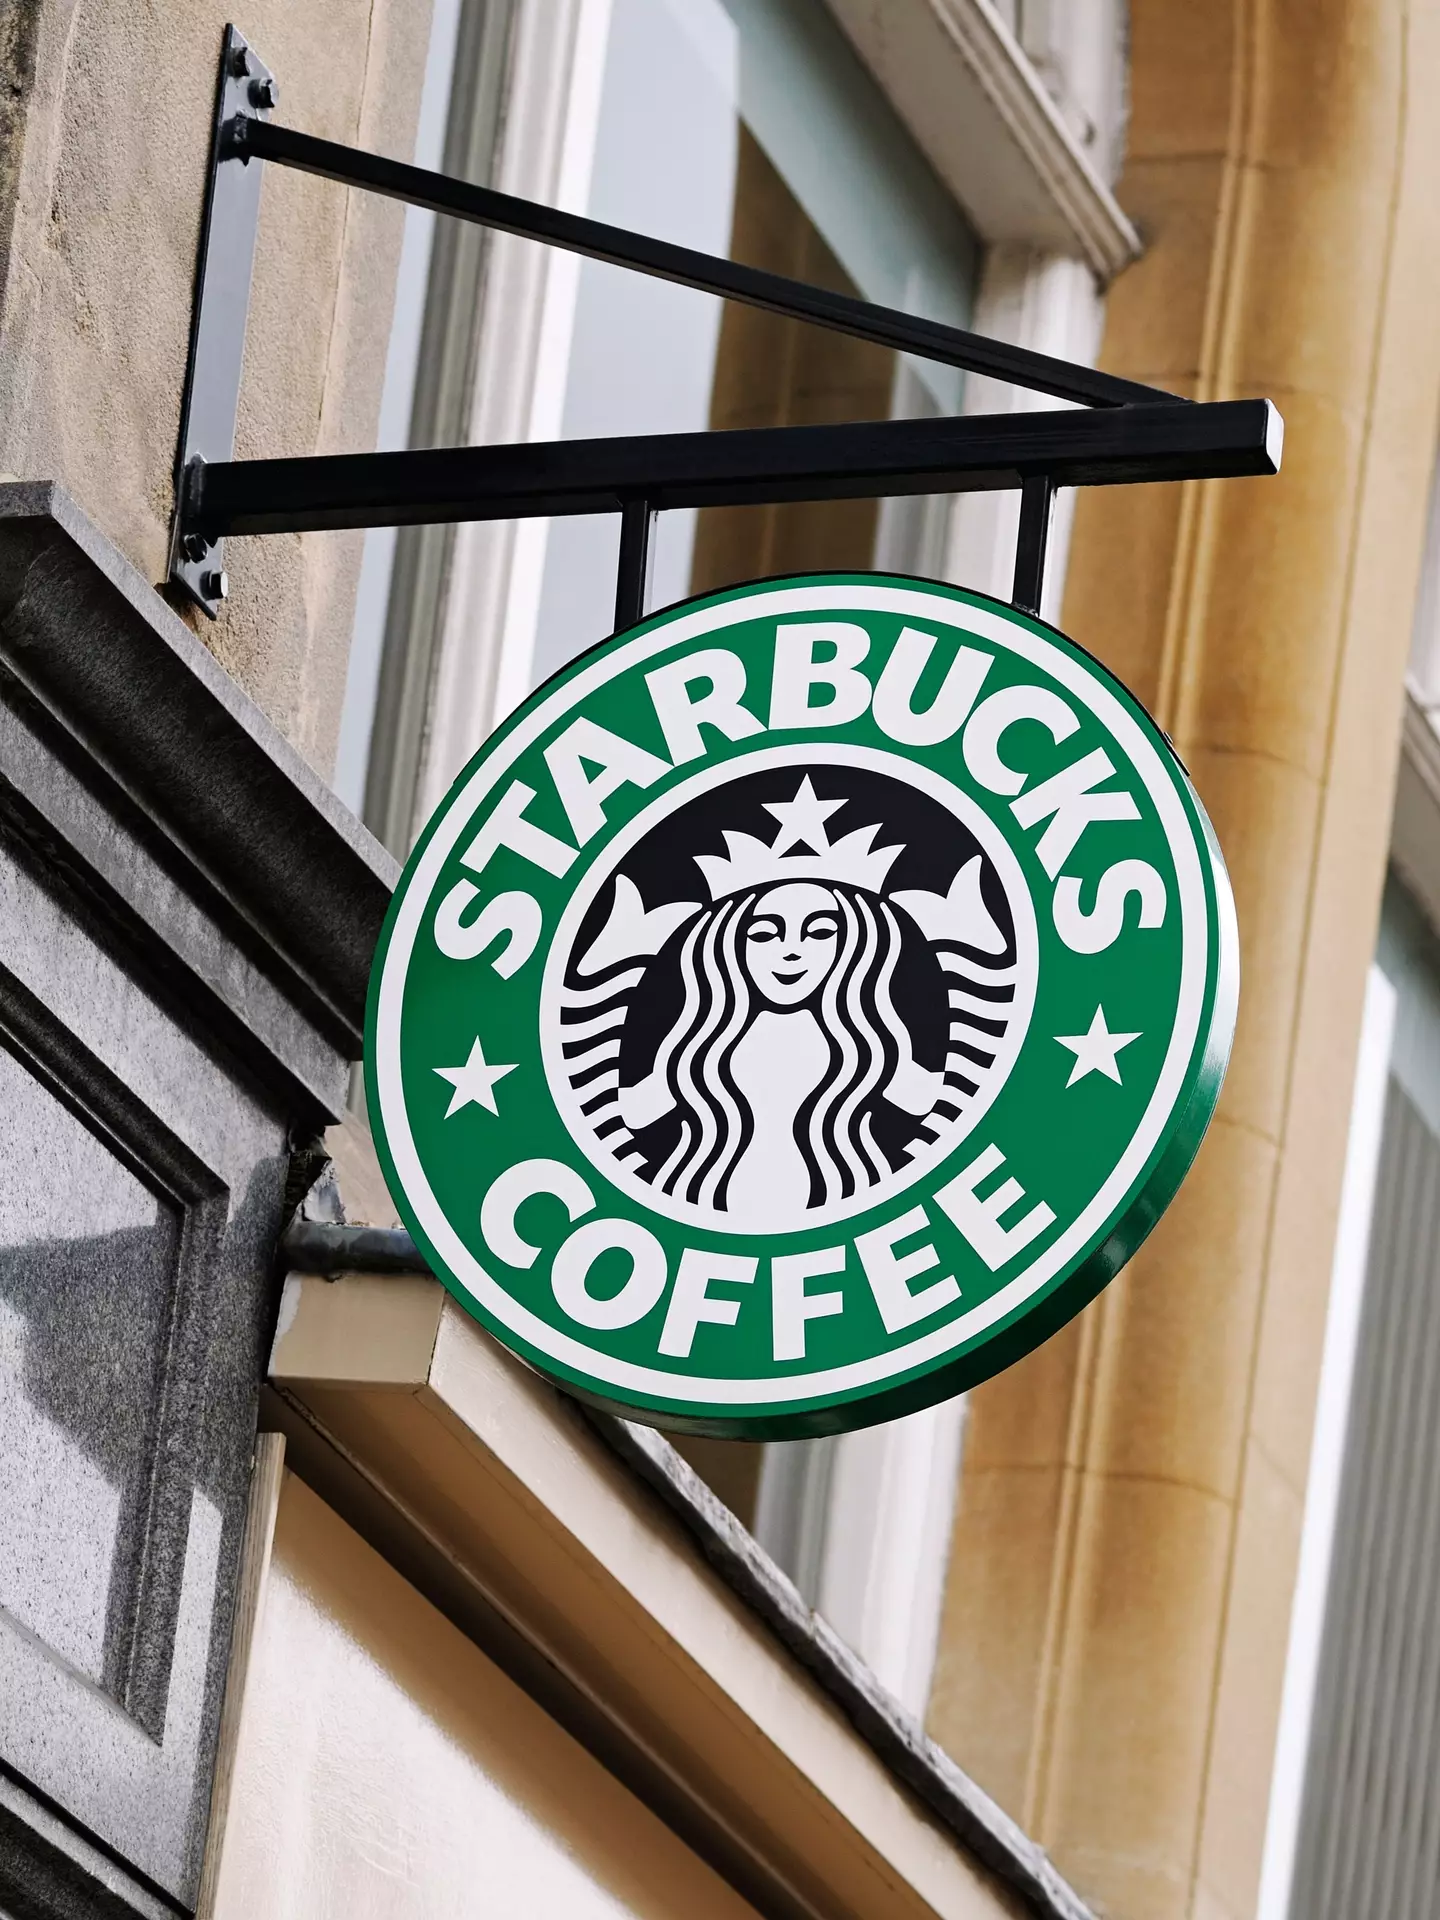 The CEO now wants to change how Starbucks does things.